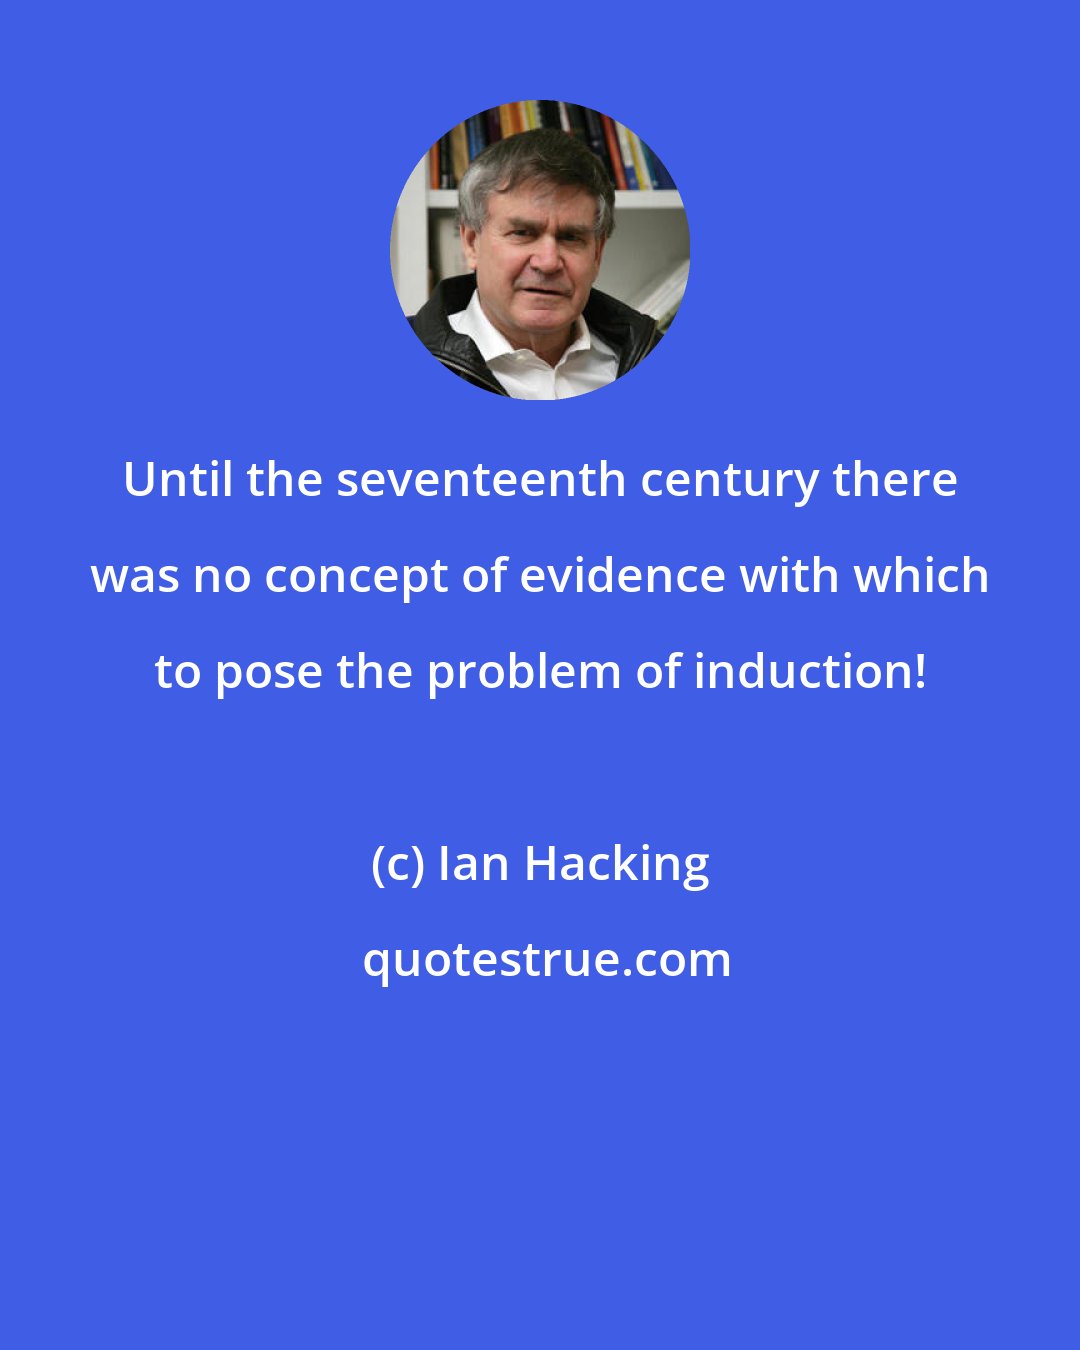 Ian Hacking: Until the seventeenth century there was no concept of evidence with which to pose the problem of induction!